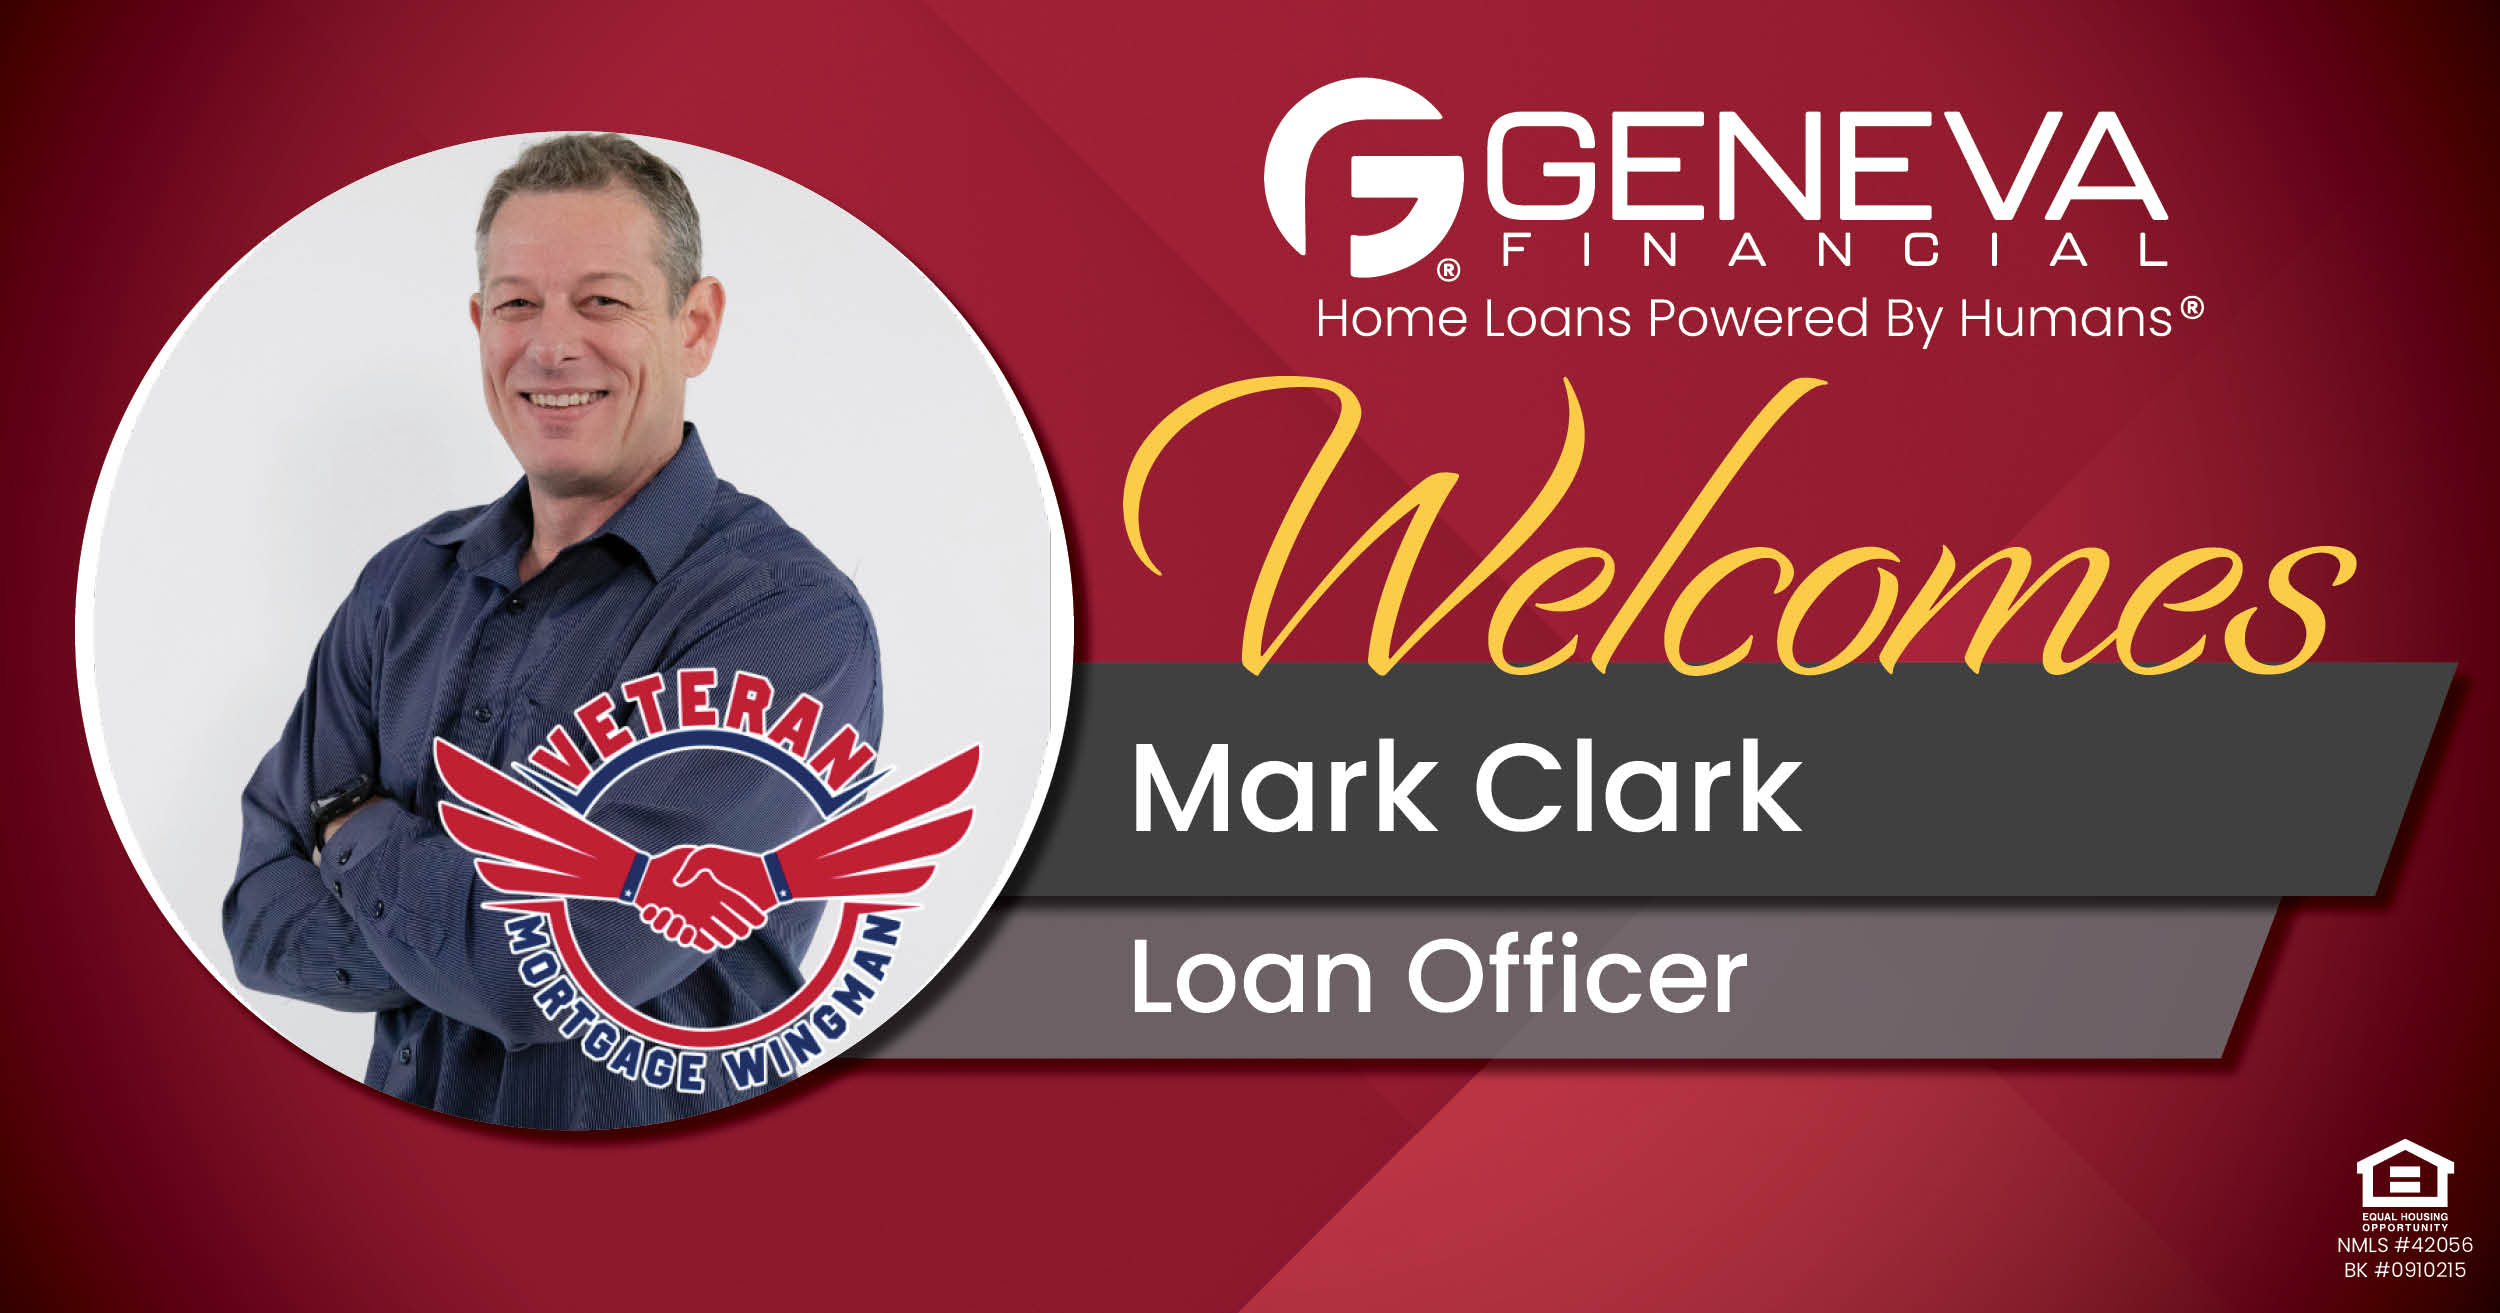 Geneva Financial Welcomes New Loan Mark Clark to the State of Georgia – Home Loans Powered by Humans®.